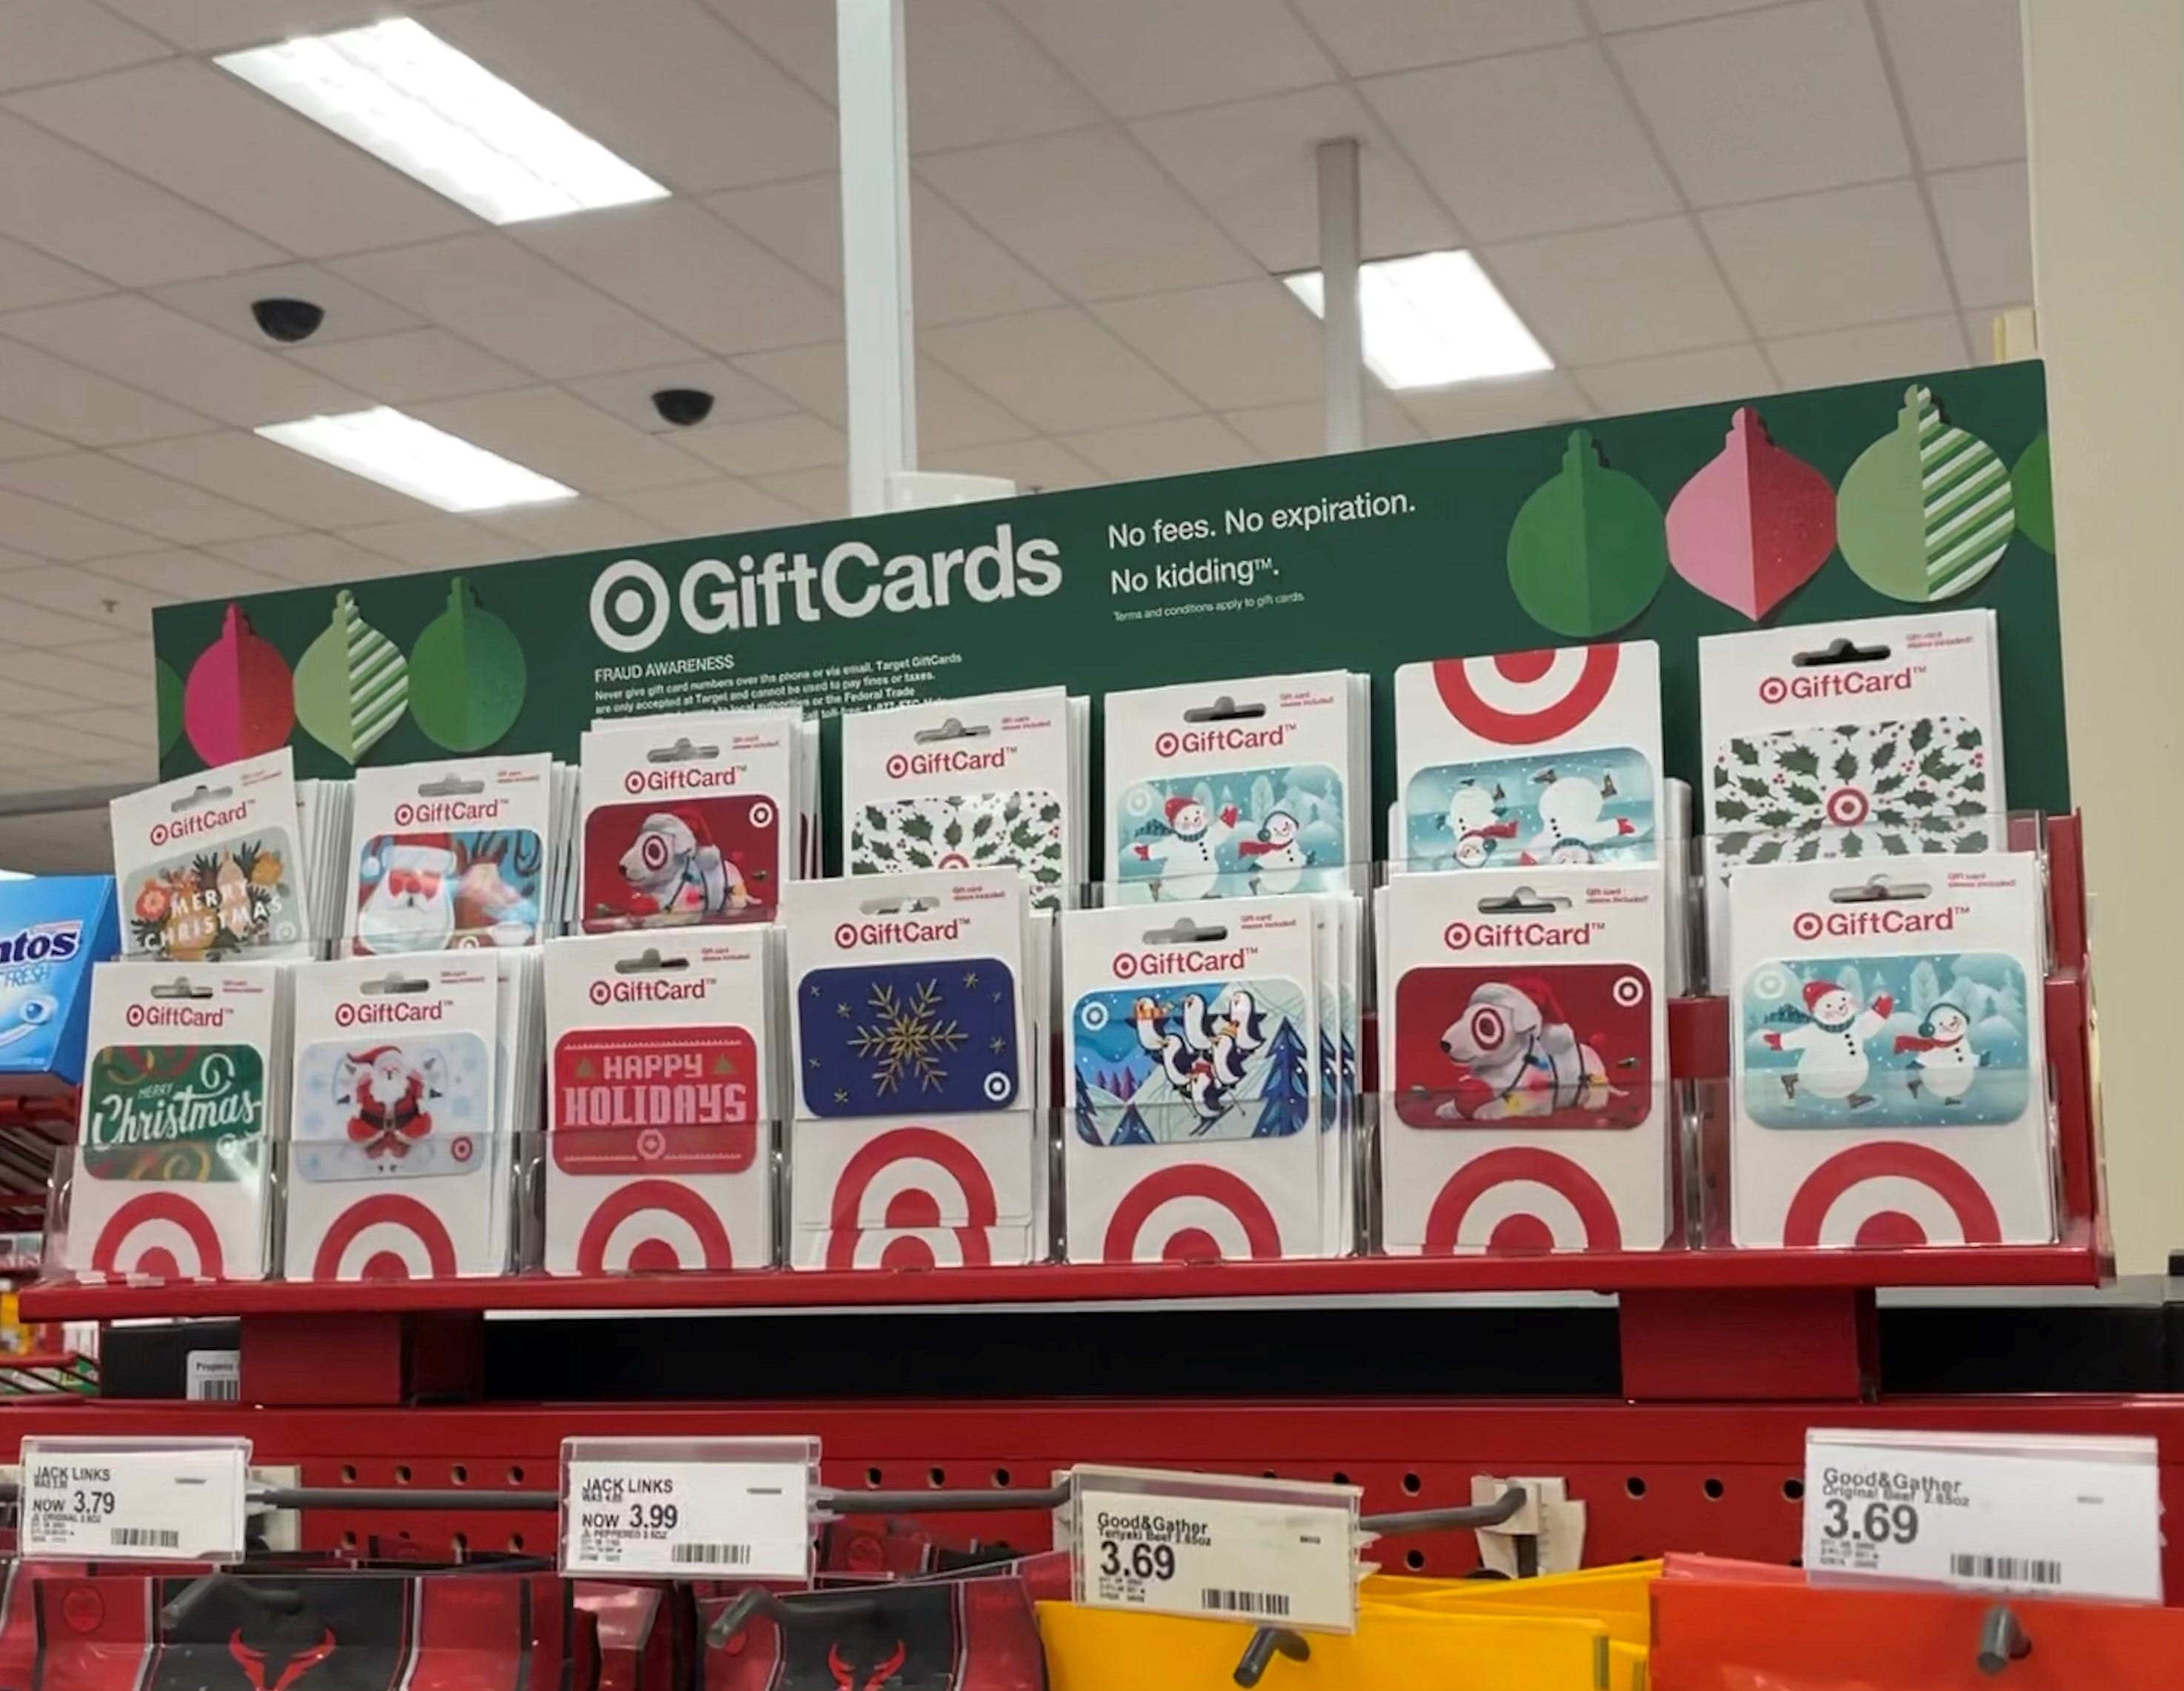 Target Gift Card Discount 2020 Save 10 Percent On Gift Cards Dec 5 6 - roblox gift card publix